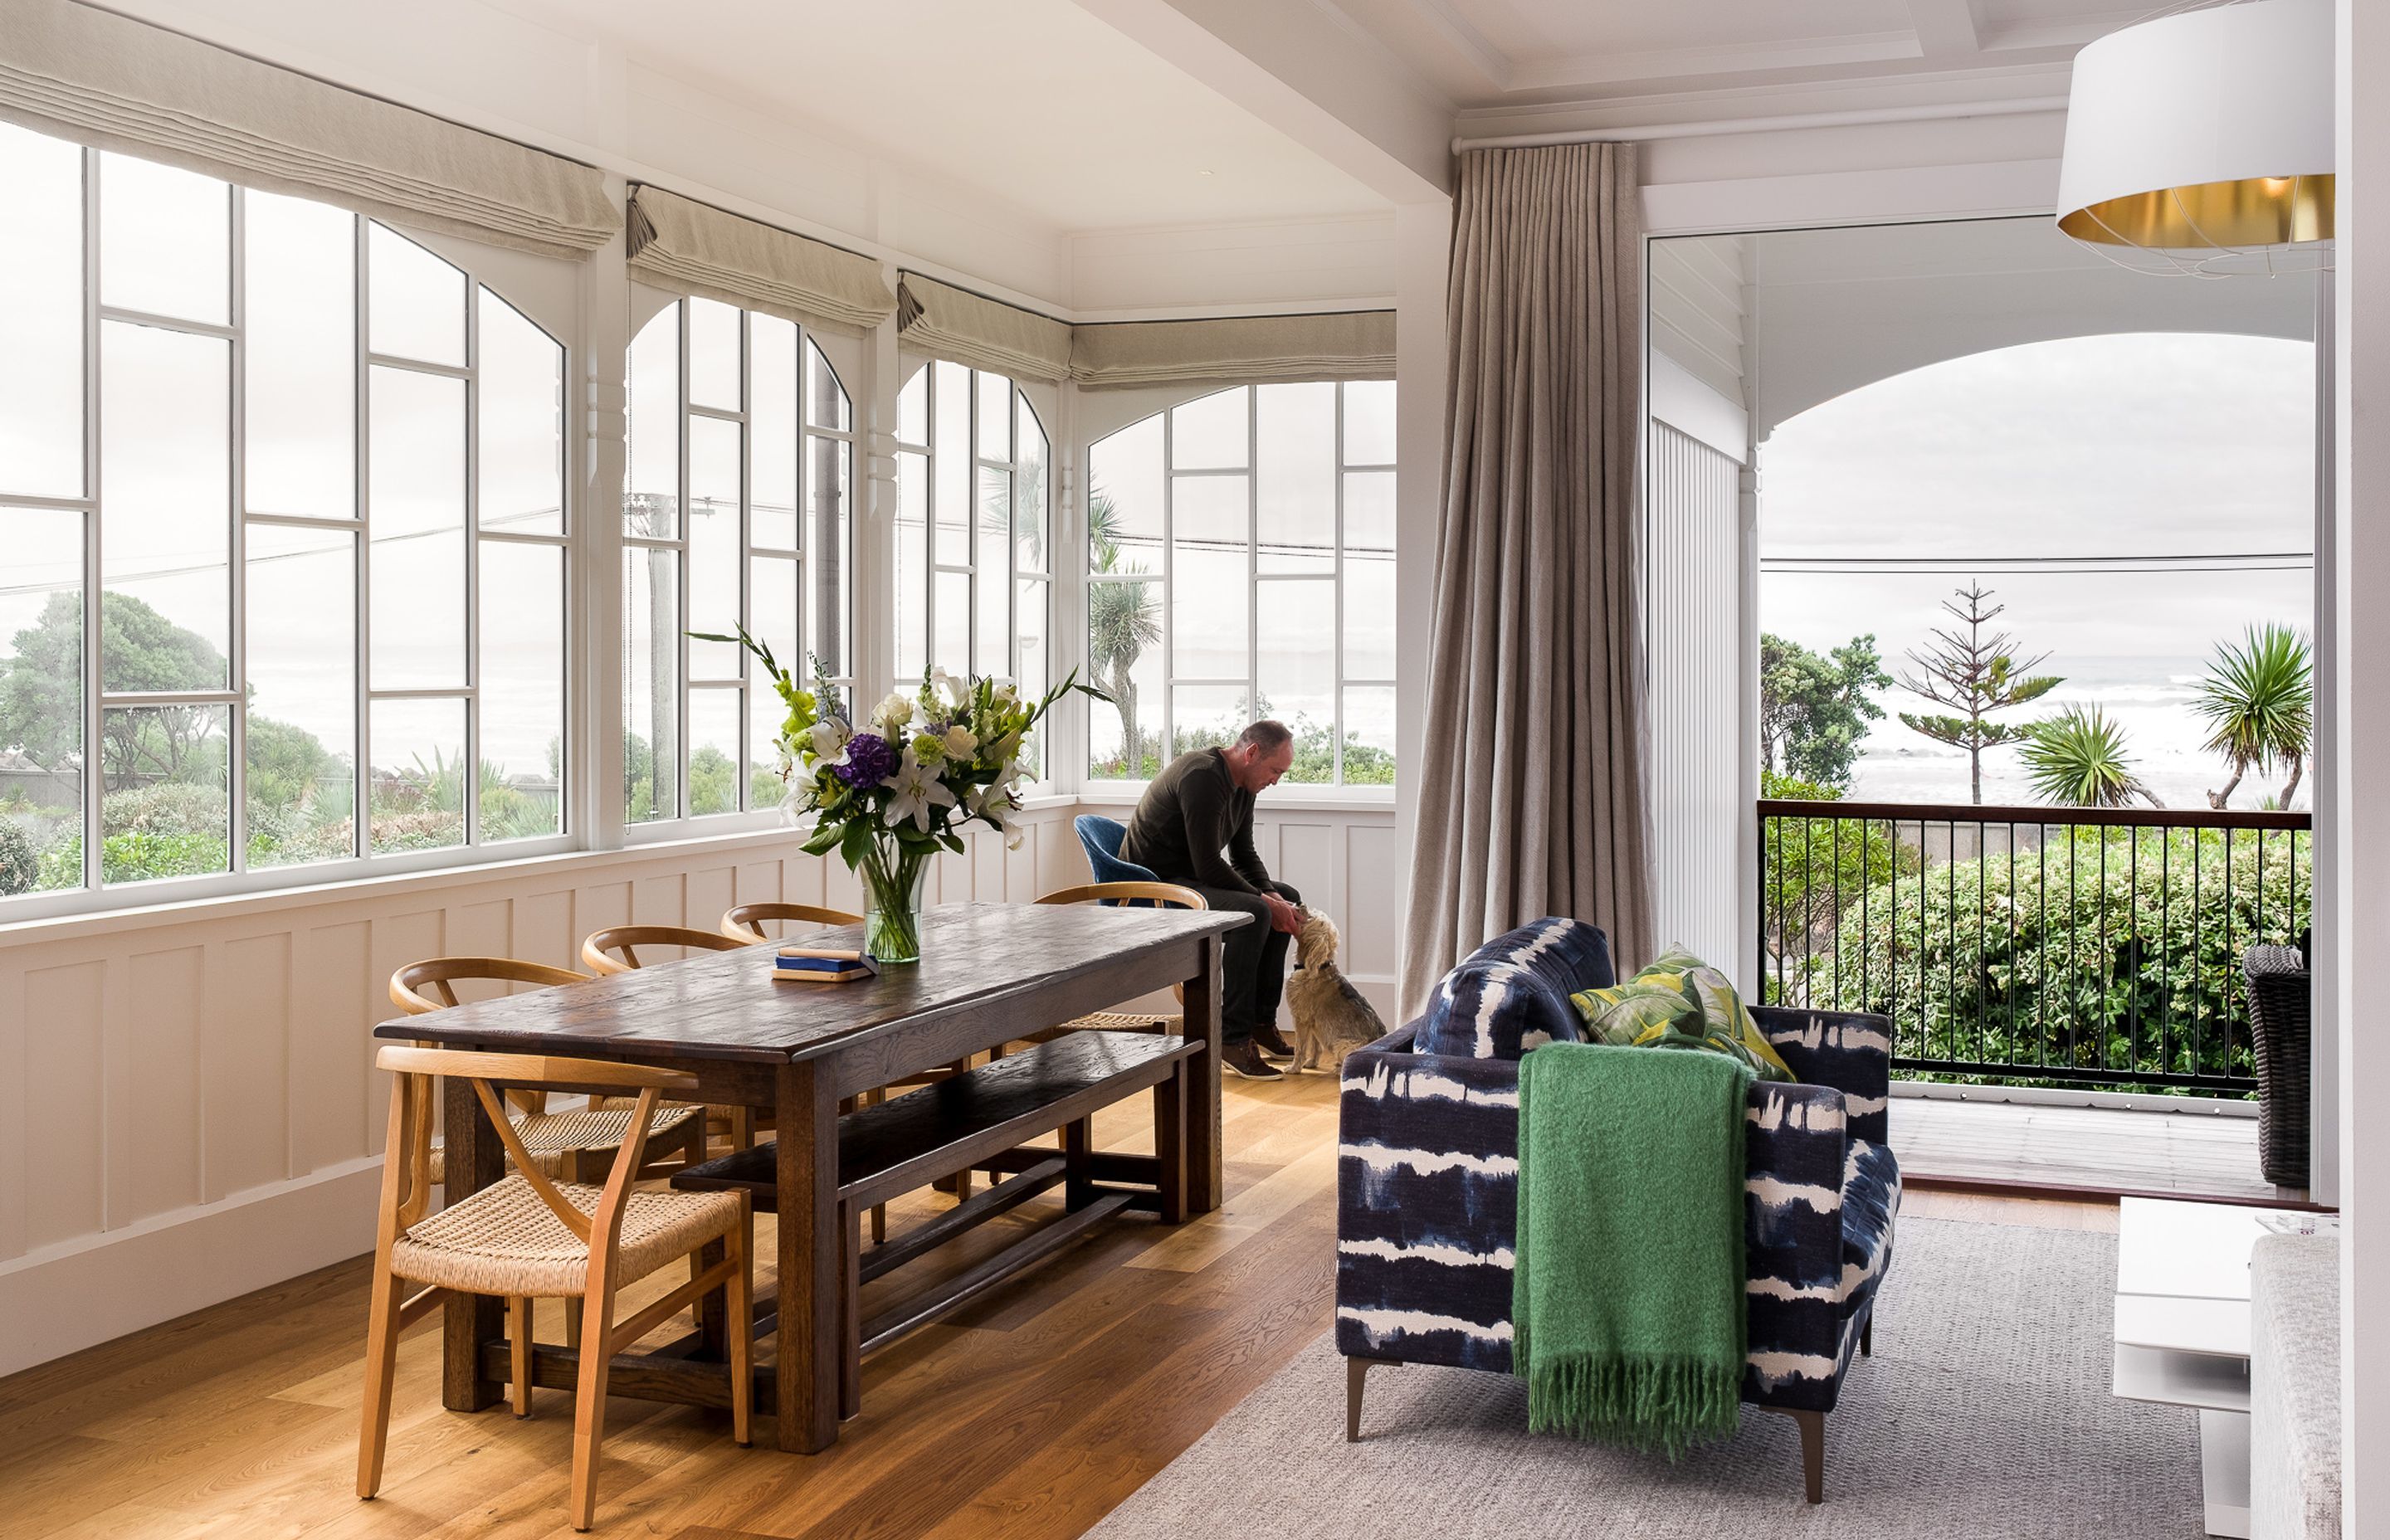 The upstairs dining and living area opens onto a verandah and a magnificent view of the ocean. The distinctive single-glazed windows have been replaced with double-glazed replicas.